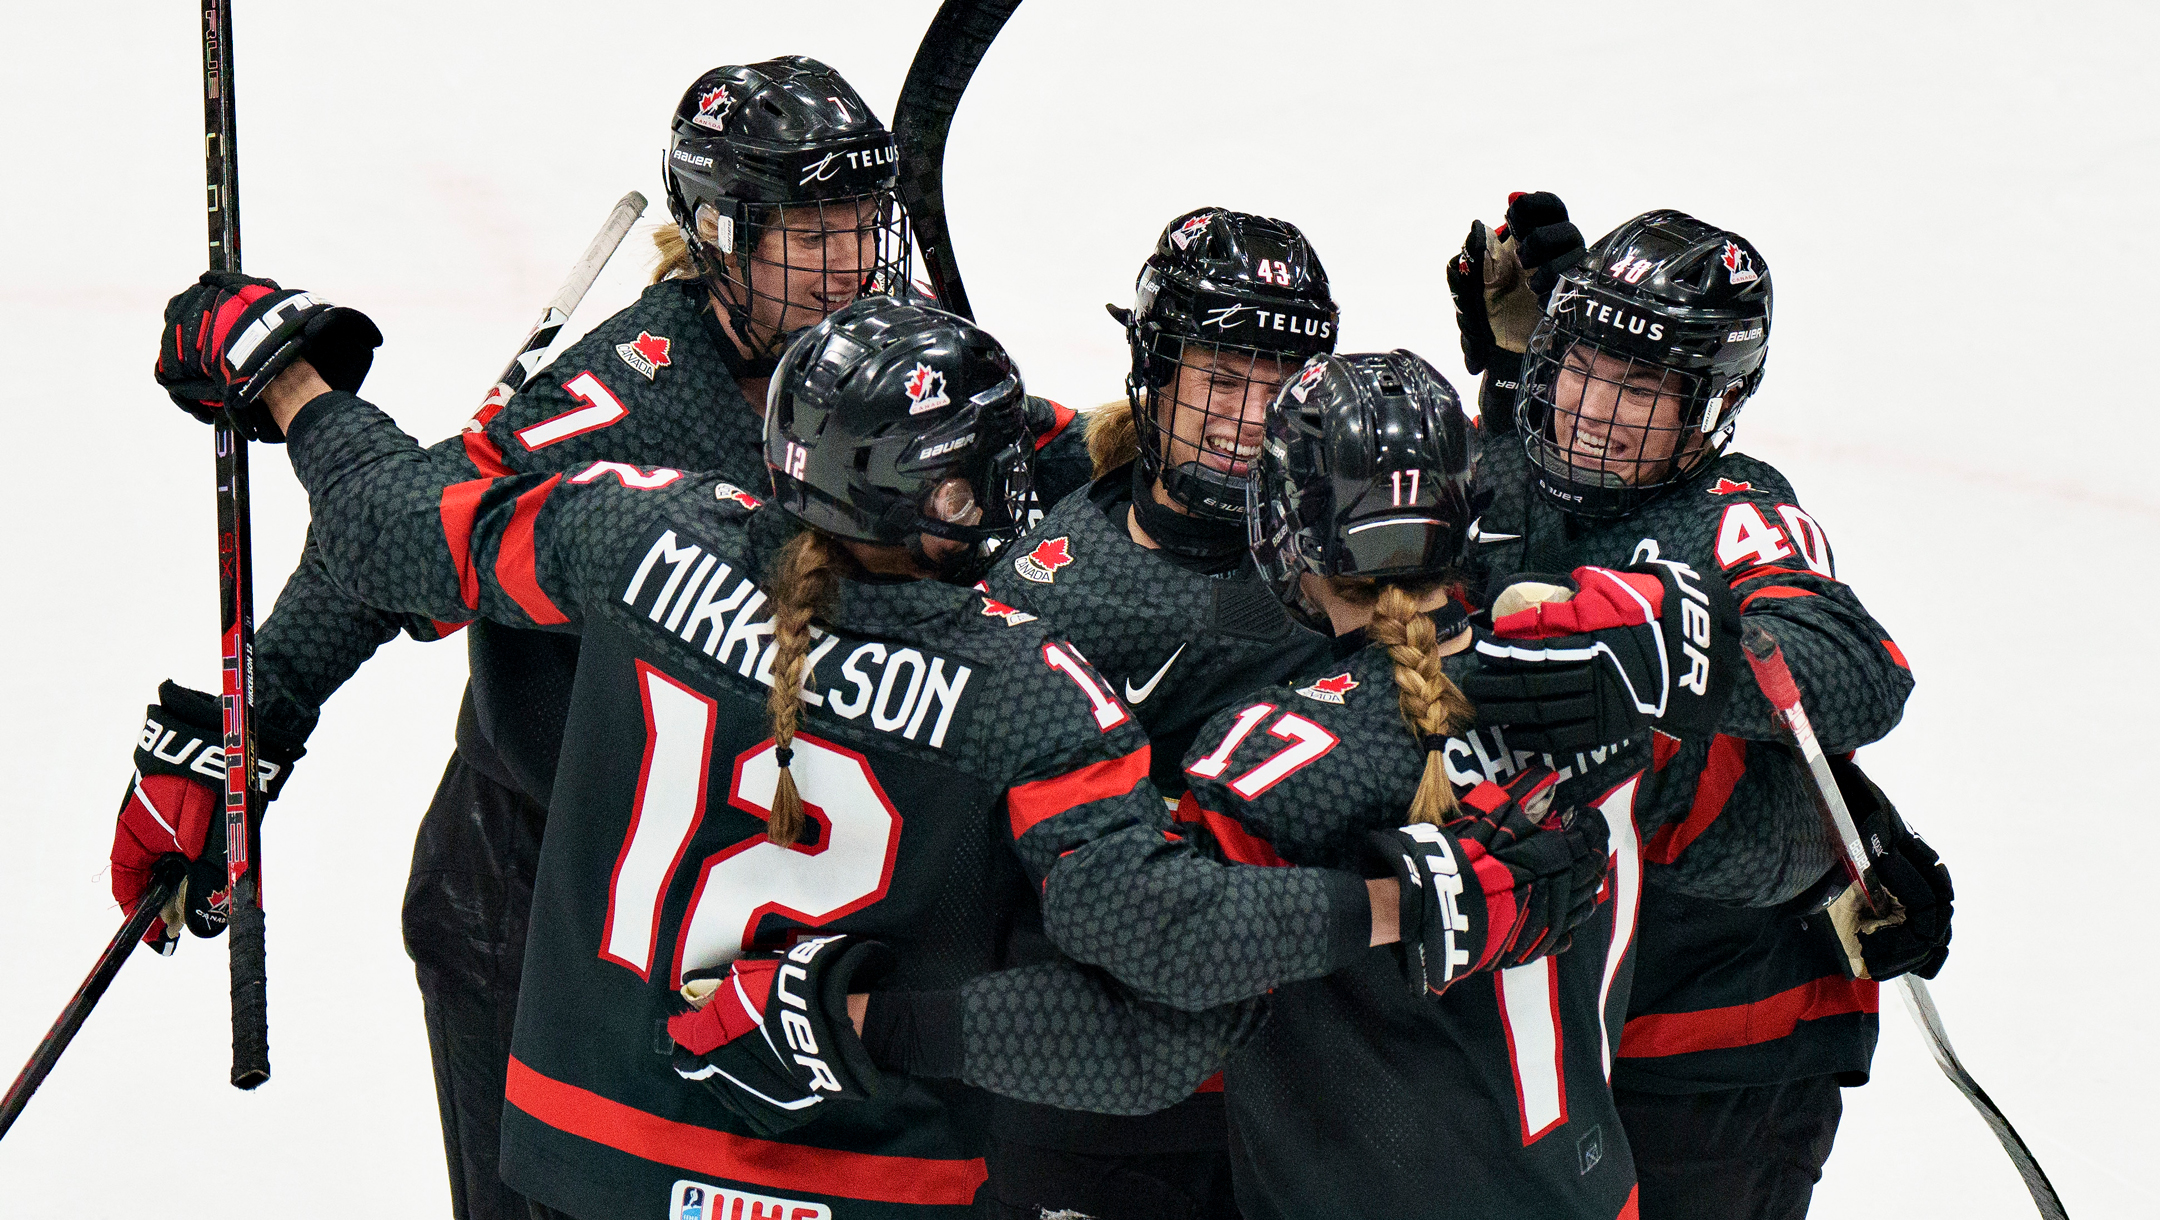 Team Canada to play for gold at womens hockey worlds - Team Canada